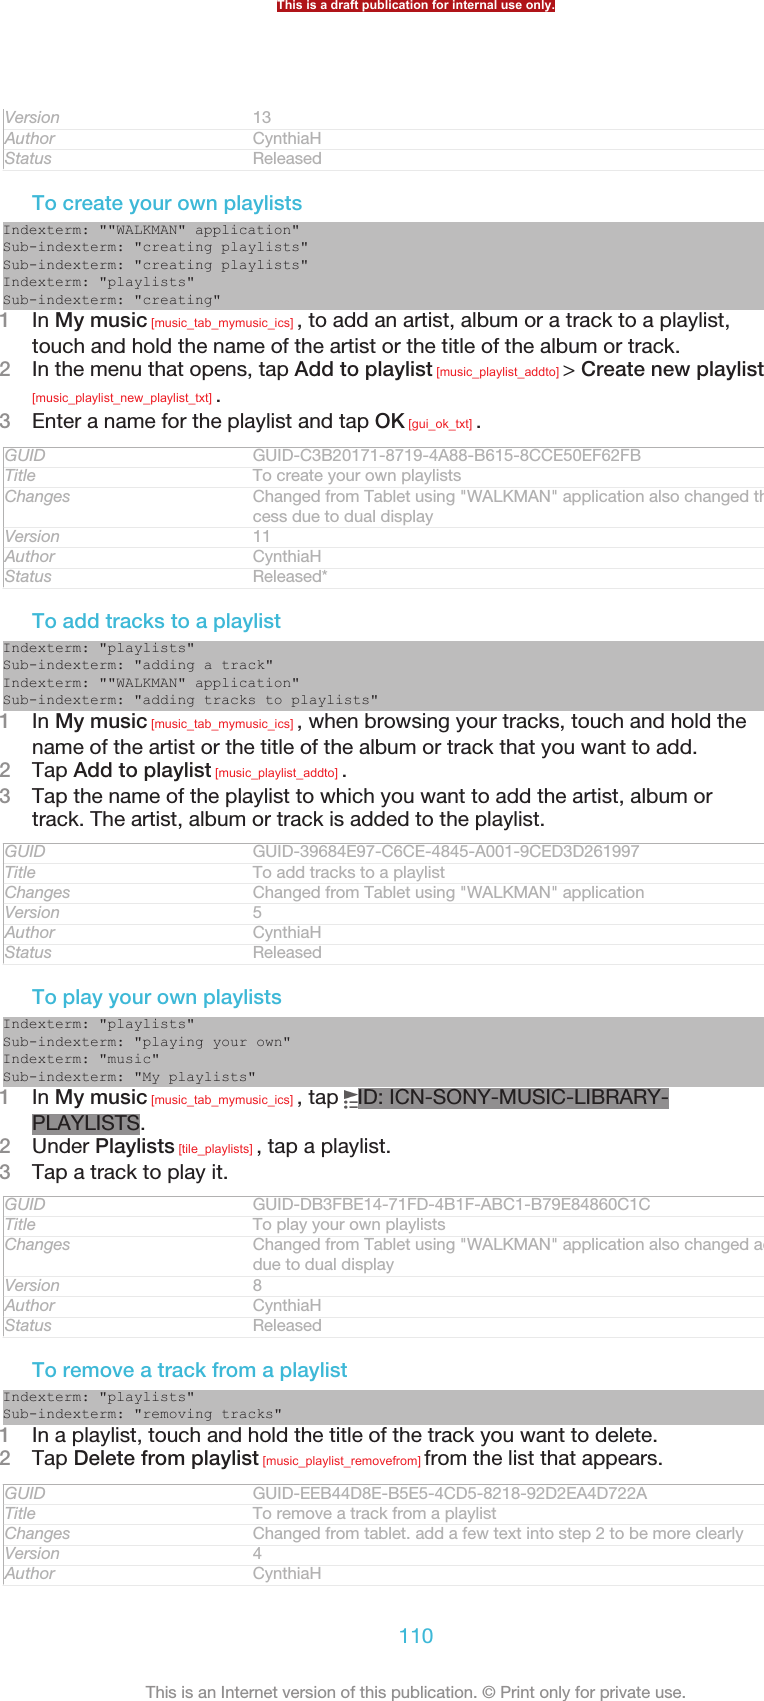 Version 13Author CynthiaHStatus ReleasedTo create your own playlistsIndexterm: &quot;&quot;WALKMAN&quot; application&quot;Sub-indexterm: &quot;creating playlists&quot;Sub-indexterm: &quot;creating playlists&quot;Indexterm: &quot;playlists&quot;Sub-indexterm: &quot;creating&quot;1In My music [music_tab_mymusic_ics] , to add an artist, album or a track to a playlist,touch and hold the name of the artist or the title of the album or track.2In the menu that opens, tap Add to playlist [music_playlist_addto] &gt; Create new playlist[music_playlist_new_playlist_txt] .3Enter a name for the playlist and tap OK [gui_ok_txt] .GUID GUID-C3B20171-8719-4A88-B615-8CCE50EF62FBTitle To create your own playlistsChanges Changed from Tablet using &quot;WALKMAN&quot; application also changed the ac-cess due to dual displayVersion 11Author CynthiaHStatus Released*To add tracks to a playlistIndexterm: &quot;playlists&quot;Sub-indexterm: &quot;adding a track&quot;Indexterm: &quot;&quot;WALKMAN&quot; application&quot;Sub-indexterm: &quot;adding tracks to playlists&quot;1In My music [music_tab_mymusic_ics] , when browsing your tracks, touch and hold thename of the artist or the title of the album or track that you want to add.2Tap Add to playlist [music_playlist_addto] .3Tap the name of the playlist to which you want to add the artist, album ortrack. The artist, album or track is added to the playlist.GUID GUID-39684E97-C6CE-4845-A001-9CED3D261997Title To add tracks to a playlistChanges Changed from Tablet using &quot;WALKMAN&quot; applicationVersion 5Author CynthiaHStatus ReleasedTo play your own playlistsIndexterm: &quot;playlists&quot;Sub-indexterm: &quot;playing your own&quot;Indexterm: &quot;music&quot;Sub-indexterm: &quot;My playlists&quot;1In My music [music_tab_mymusic_ics] , tap  ID: ICN-SONY-MUSIC-LIBRARY-PLAYLISTS.2Under Playlists [tile_playlists] , tap a playlist.3Tap a track to play it.GUID GUID-DB3FBE14-71FD-4B1F-ABC1-B79E84860C1CTitle To play your own playlistsChanges Changed from Tablet using &quot;WALKMAN&quot; application also changed accessdue to dual displayVersion 8Author CynthiaHStatus ReleasedTo remove a track from a playlistIndexterm: &quot;playlists&quot;Sub-indexterm: &quot;removing tracks&quot;1In a playlist, touch and hold the title of the track you want to delete.2Tap Delete from playlist [music_playlist_removefrom] from the list that appears.GUID GUID-EEB44D8E-B5E5-4CD5-8218-92D2EA4D722ATitle To remove a track from a playlistChanges Changed from tablet. add a few text into step 2 to be more clearlyVersion 4Author CynthiaHThis is a draft publication for internal use only.110This is an Internet version of this publication. © Print only for private use.